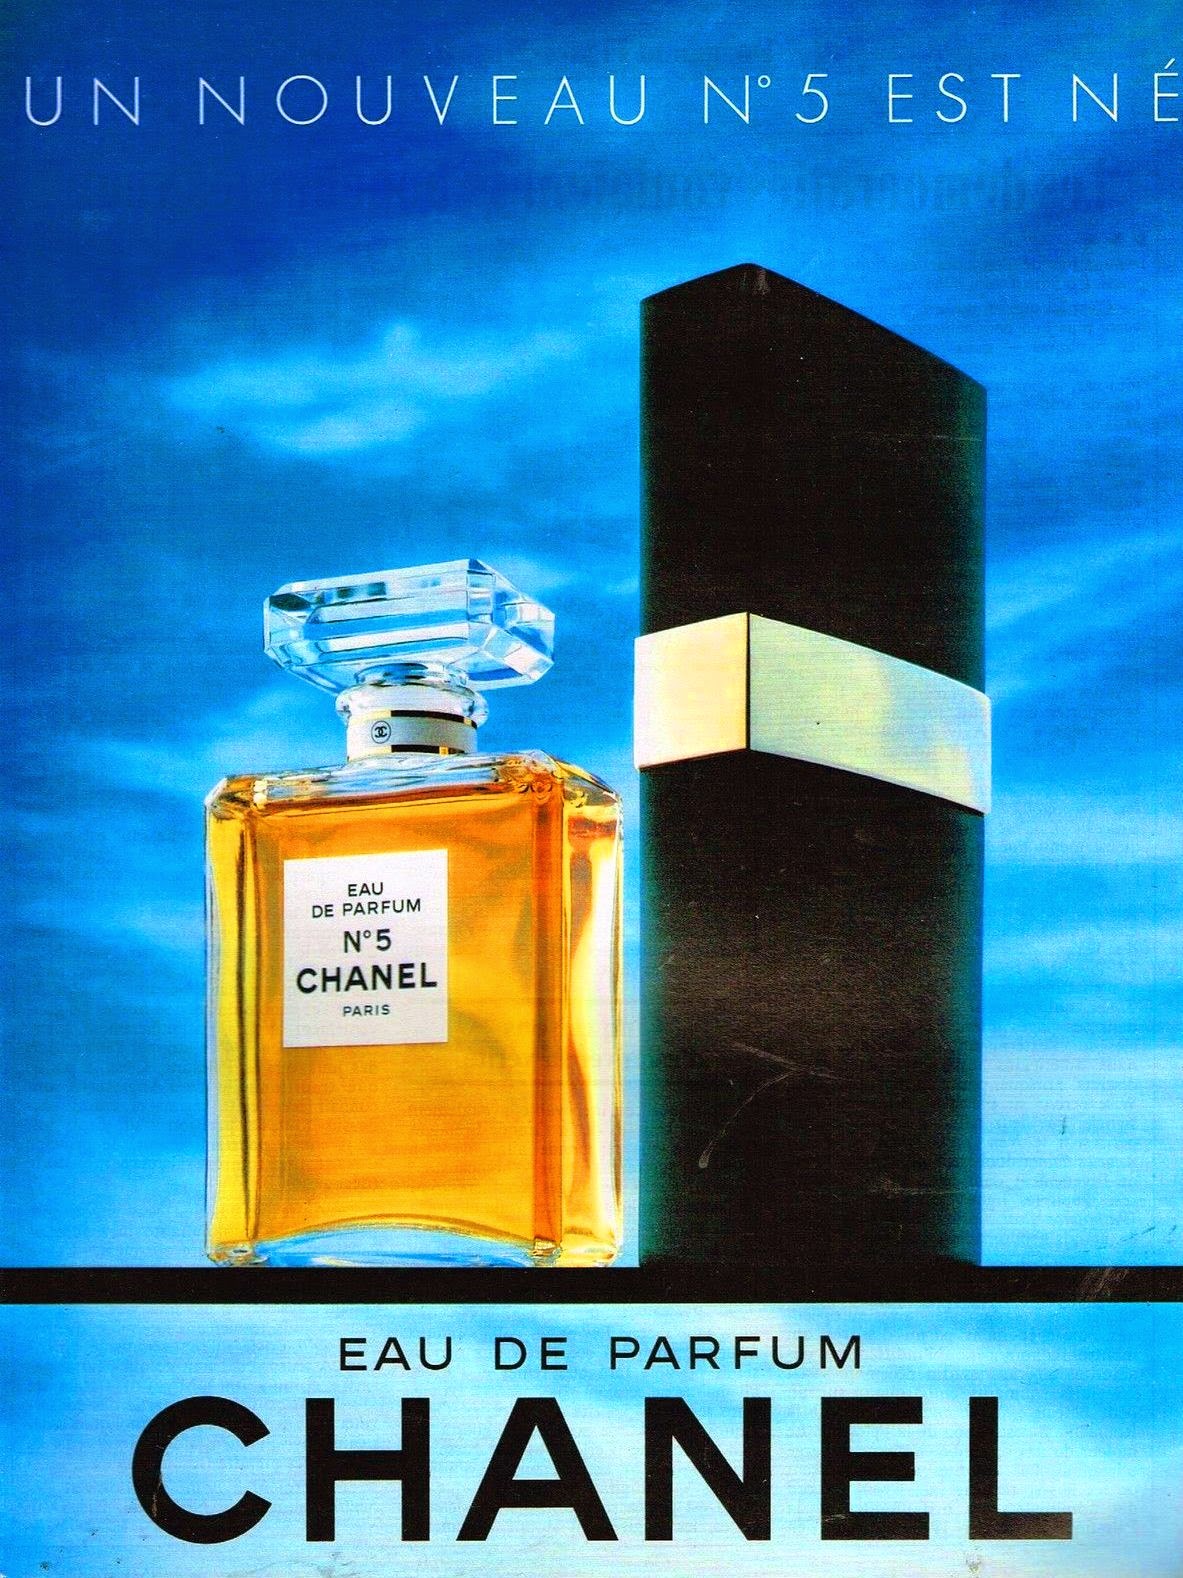 Raiders of the Lost Scent: How to recognize CHANEL perfumes.